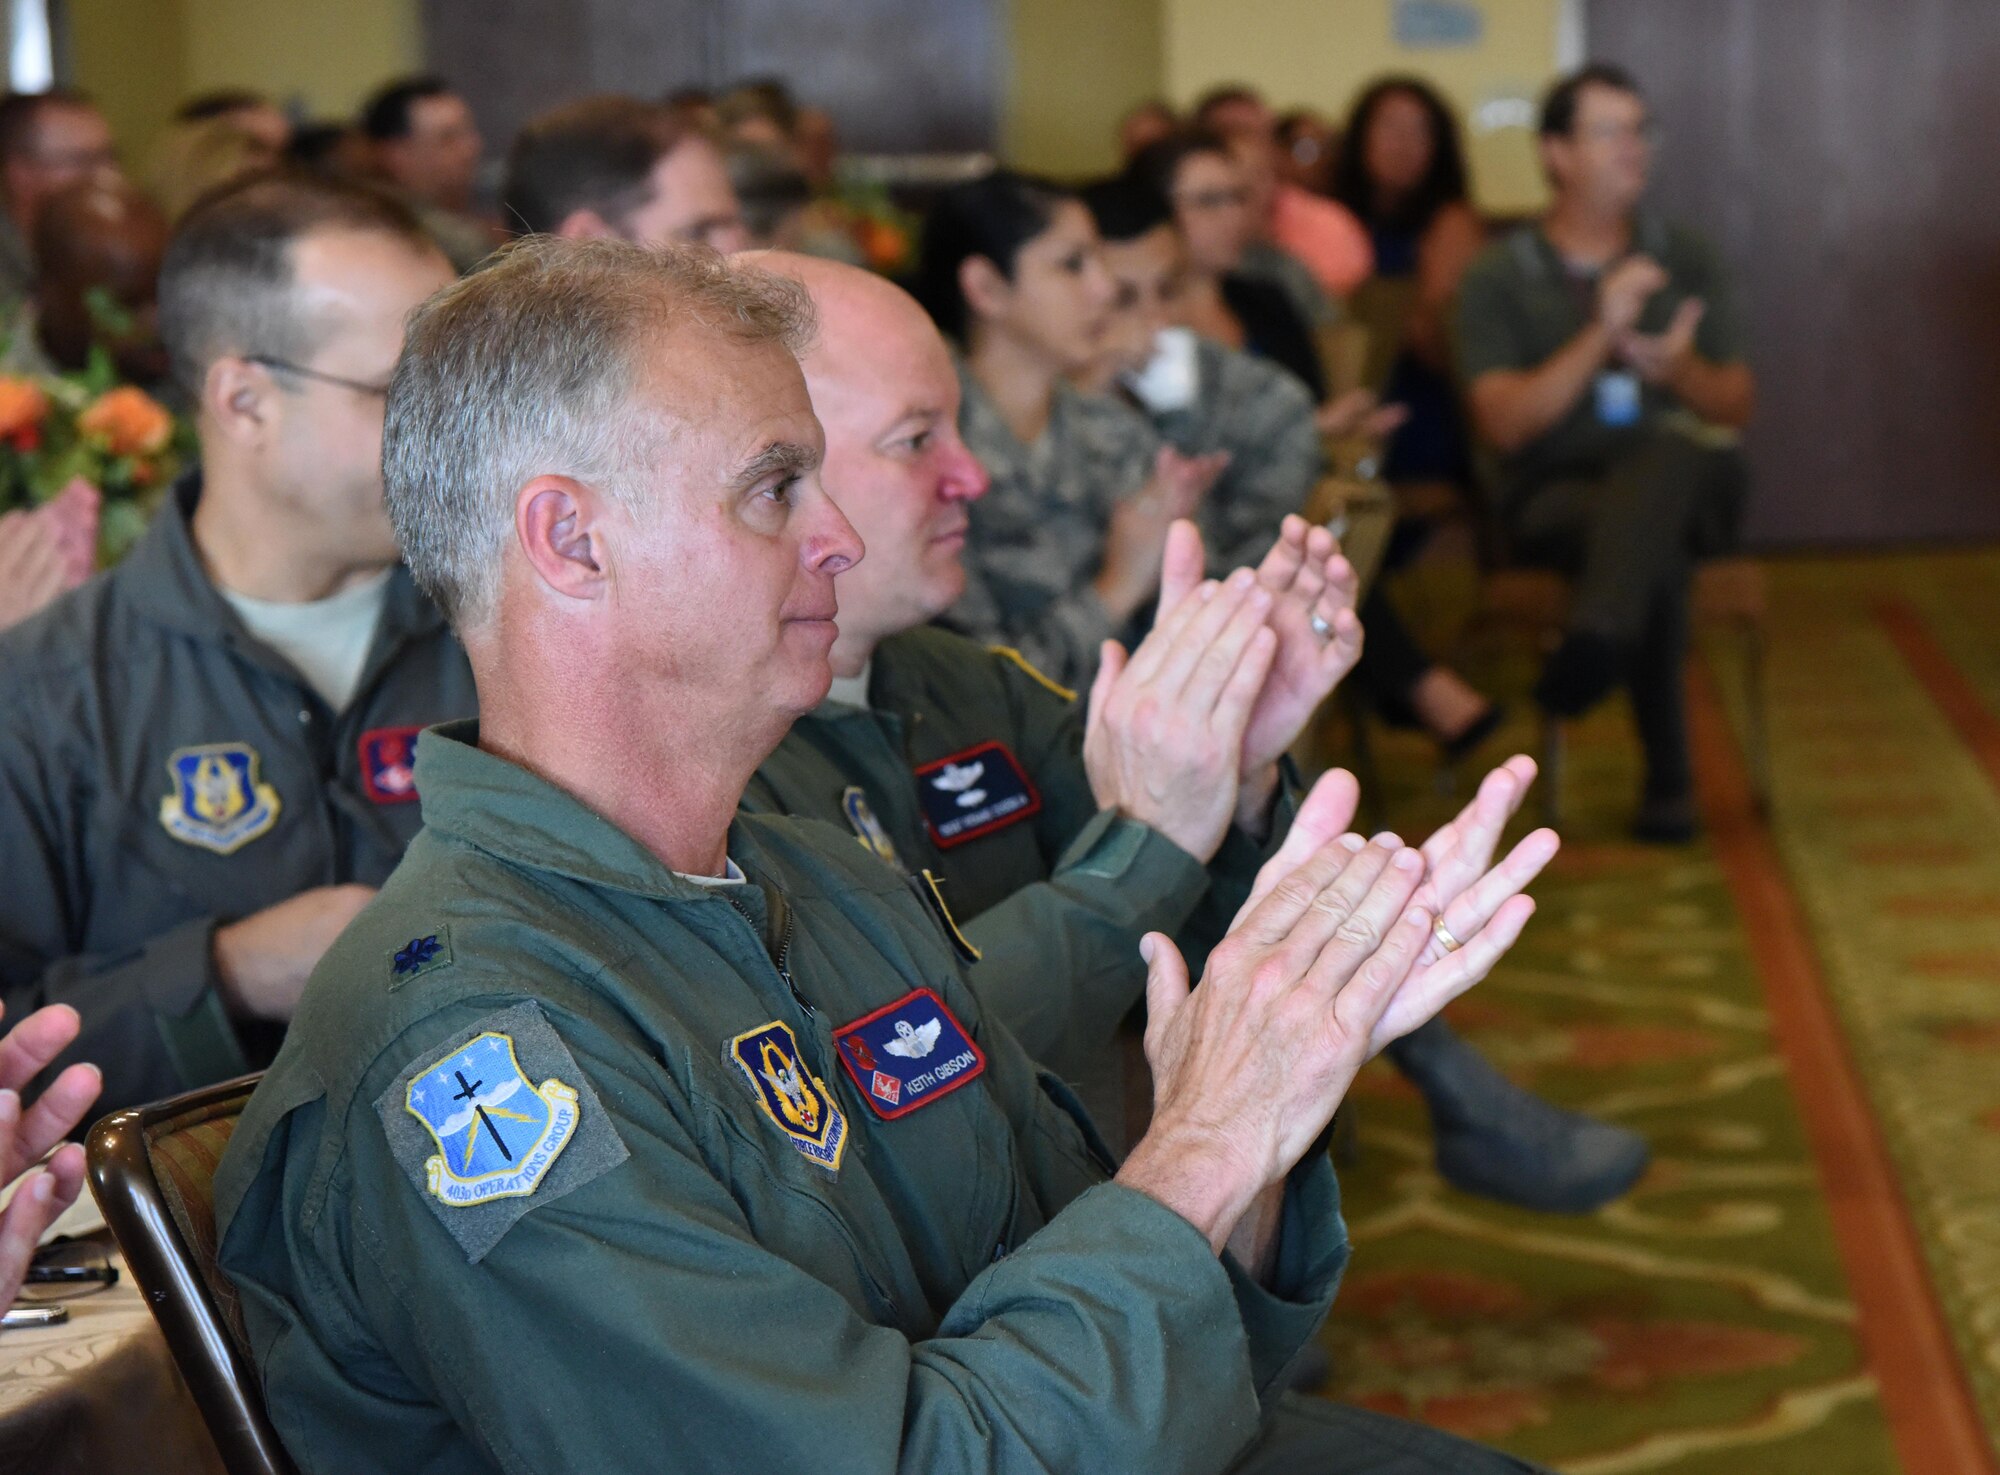 Lt. Col. Keith Gibson, 403rd Operations Group deputy commander, applauds during the Biloxi Chamber Morning Call at the Bay Breeze Event Center Sept. 28, 2017, on Keesler Air Force Base, Mississippi. Local business and community leaders attended the event to learn more about the base’s mission and its Airmen. During the event, hosted by the 81st Training Wing, members of the 334th Training Squadron drill team performed and several Keesler Airmen shared their story about why they joined the Air Force. (U.S. Air Force photo by Kemberly Groue)